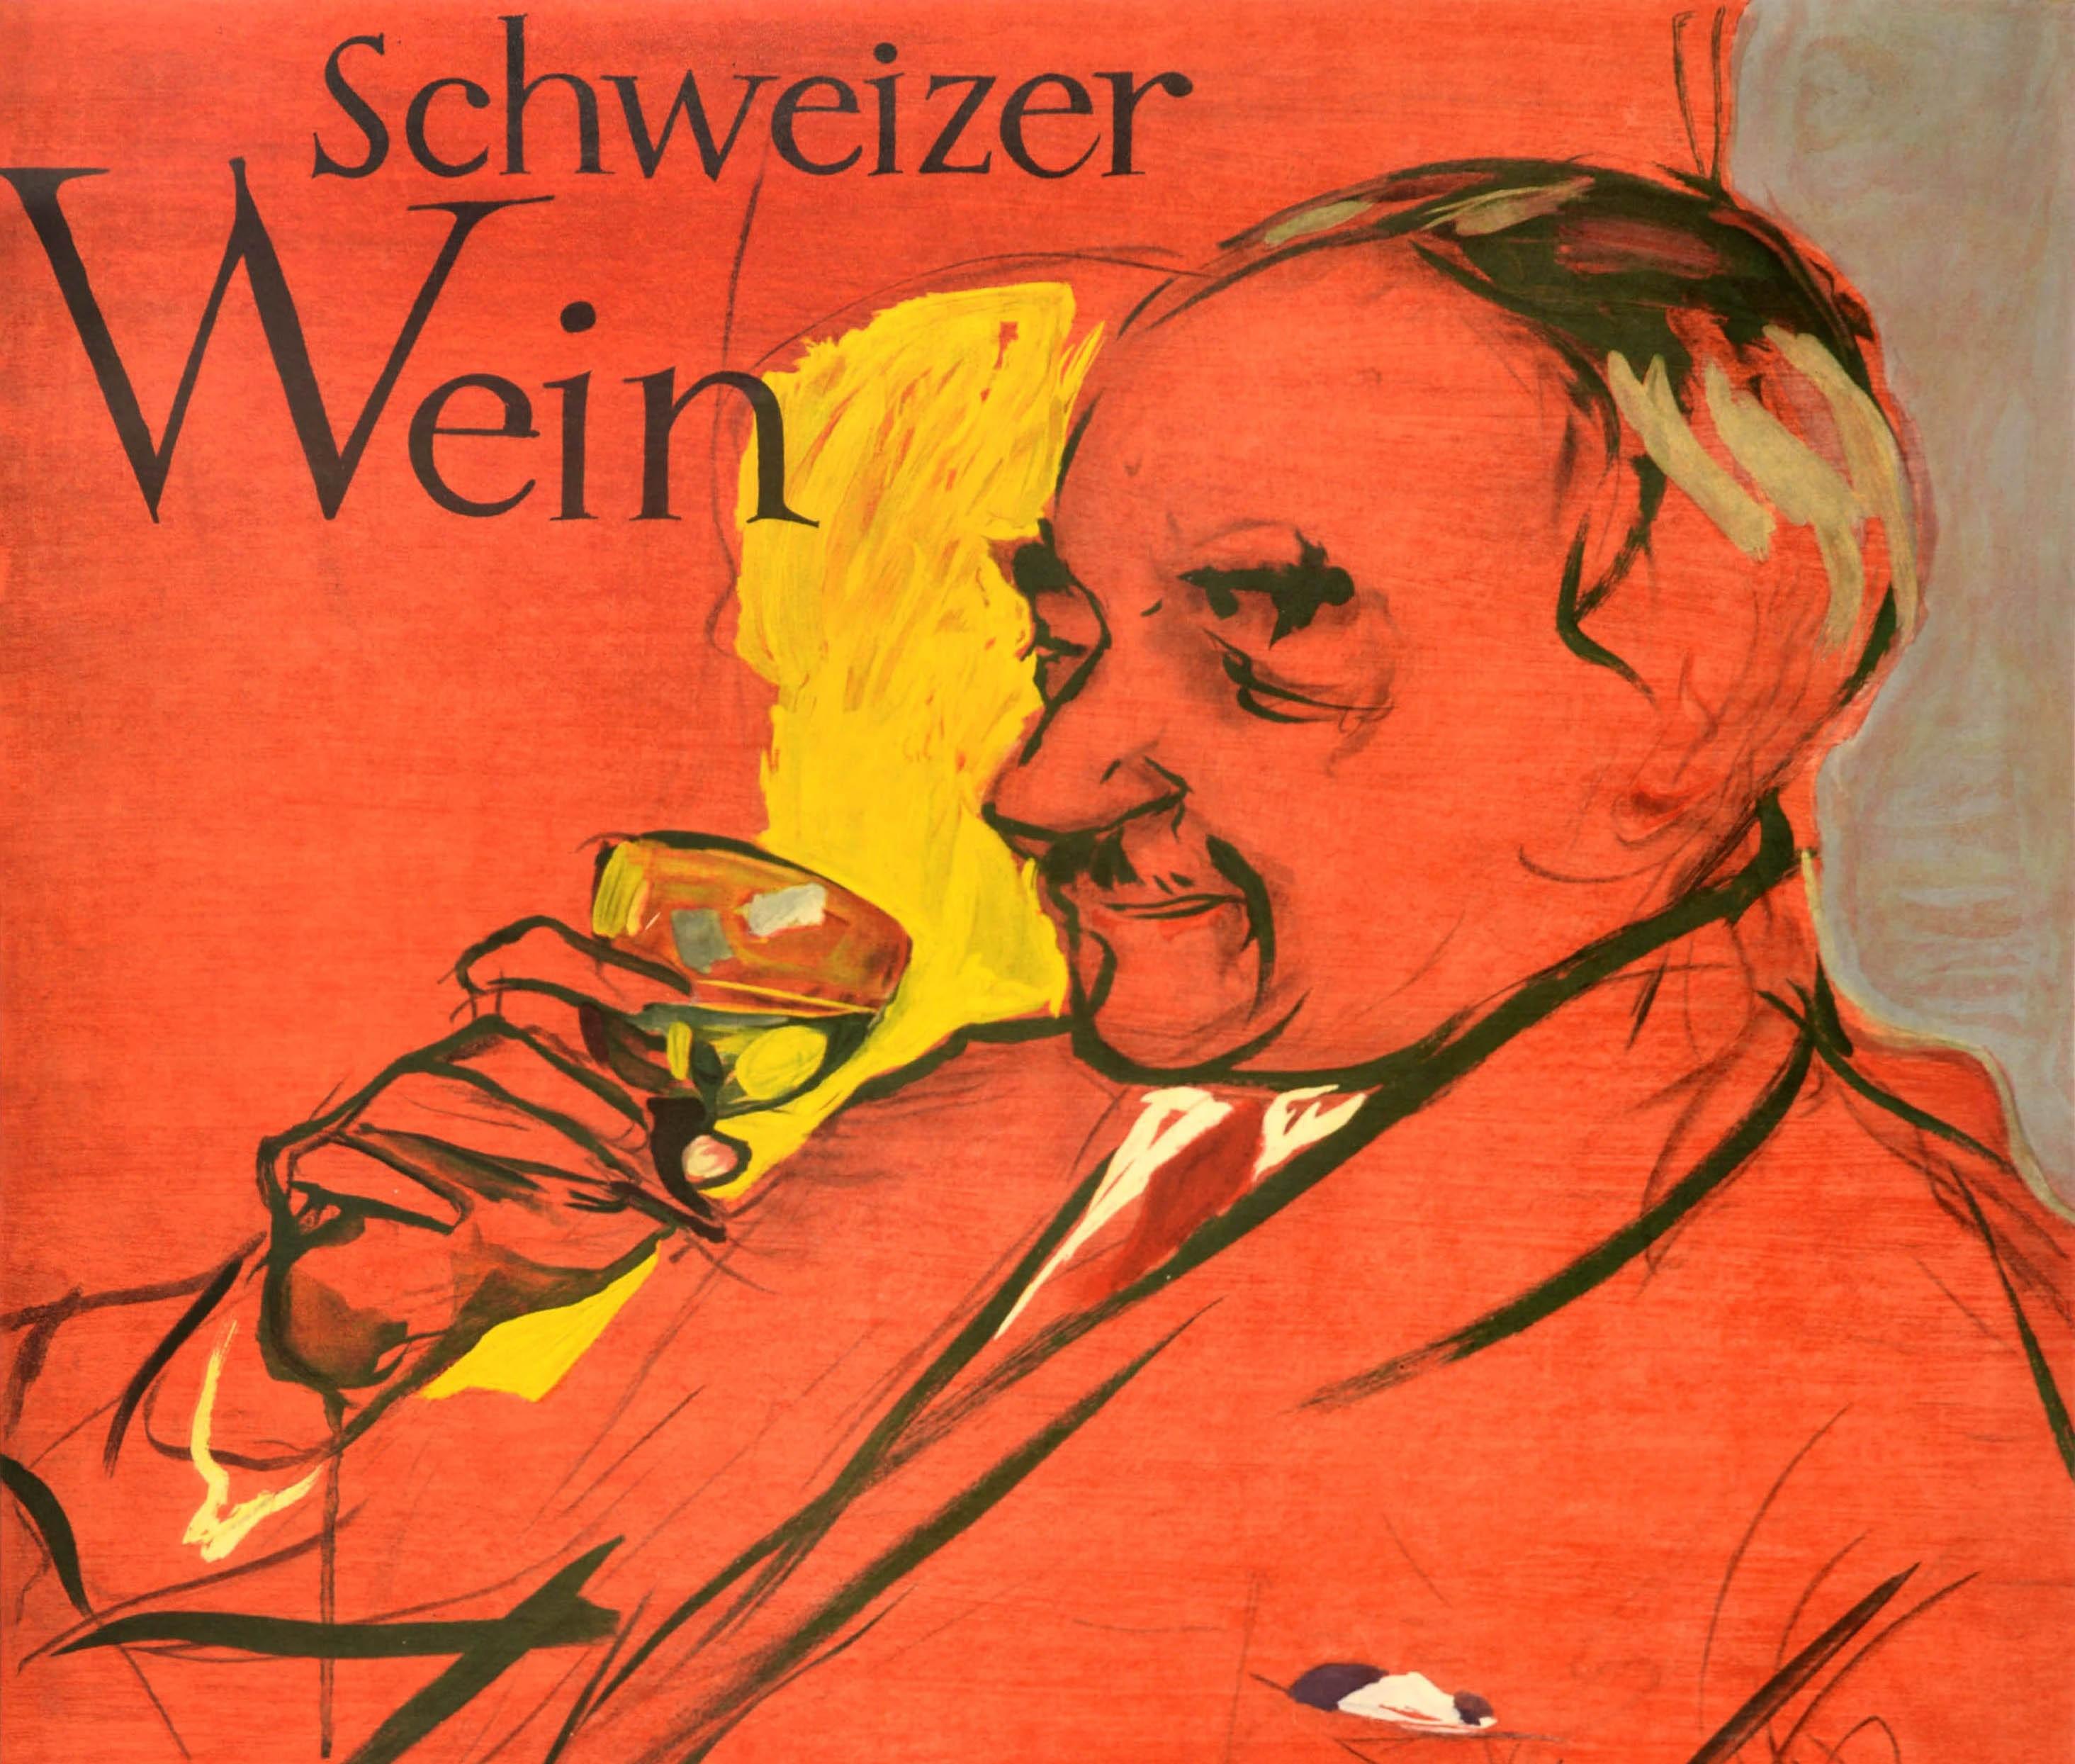 Original vintage drink advertising poster - Schweizer Wein soll es sein / It should be Swiss wine - featuring an illustration against a red background by the notable artist Hans Falk (1918-2002) depicting a smartly dressed gentleman raising a glass